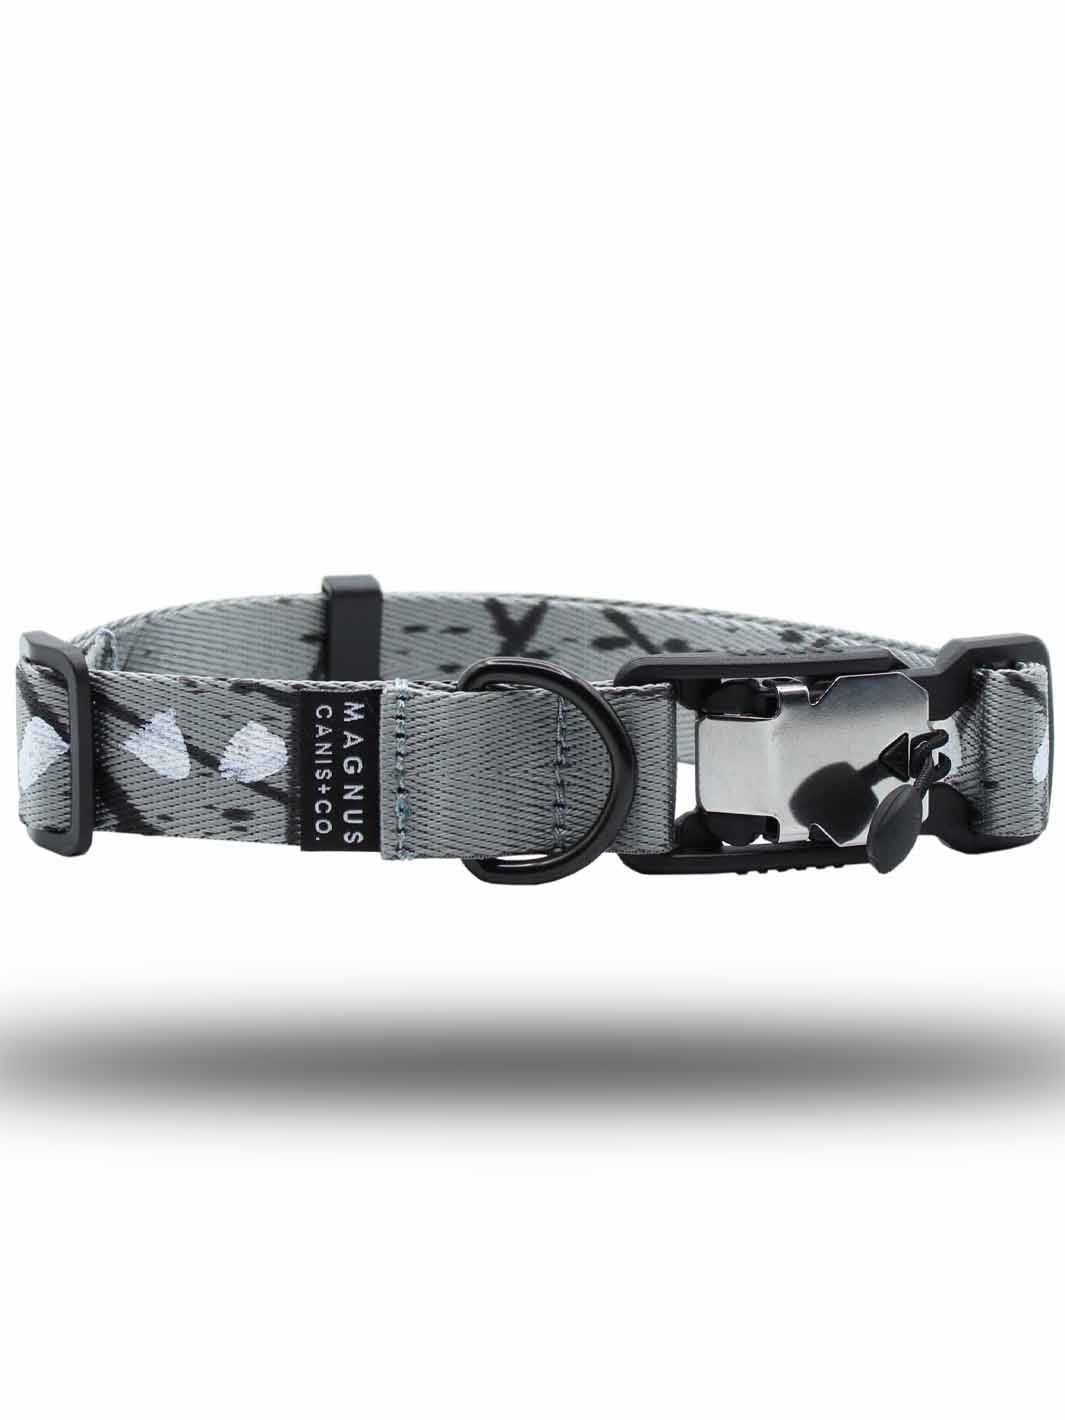 A MAGNUS Canis silver printed pattern strap dog collar with a magnetic buckle laying horizontally with a white background.